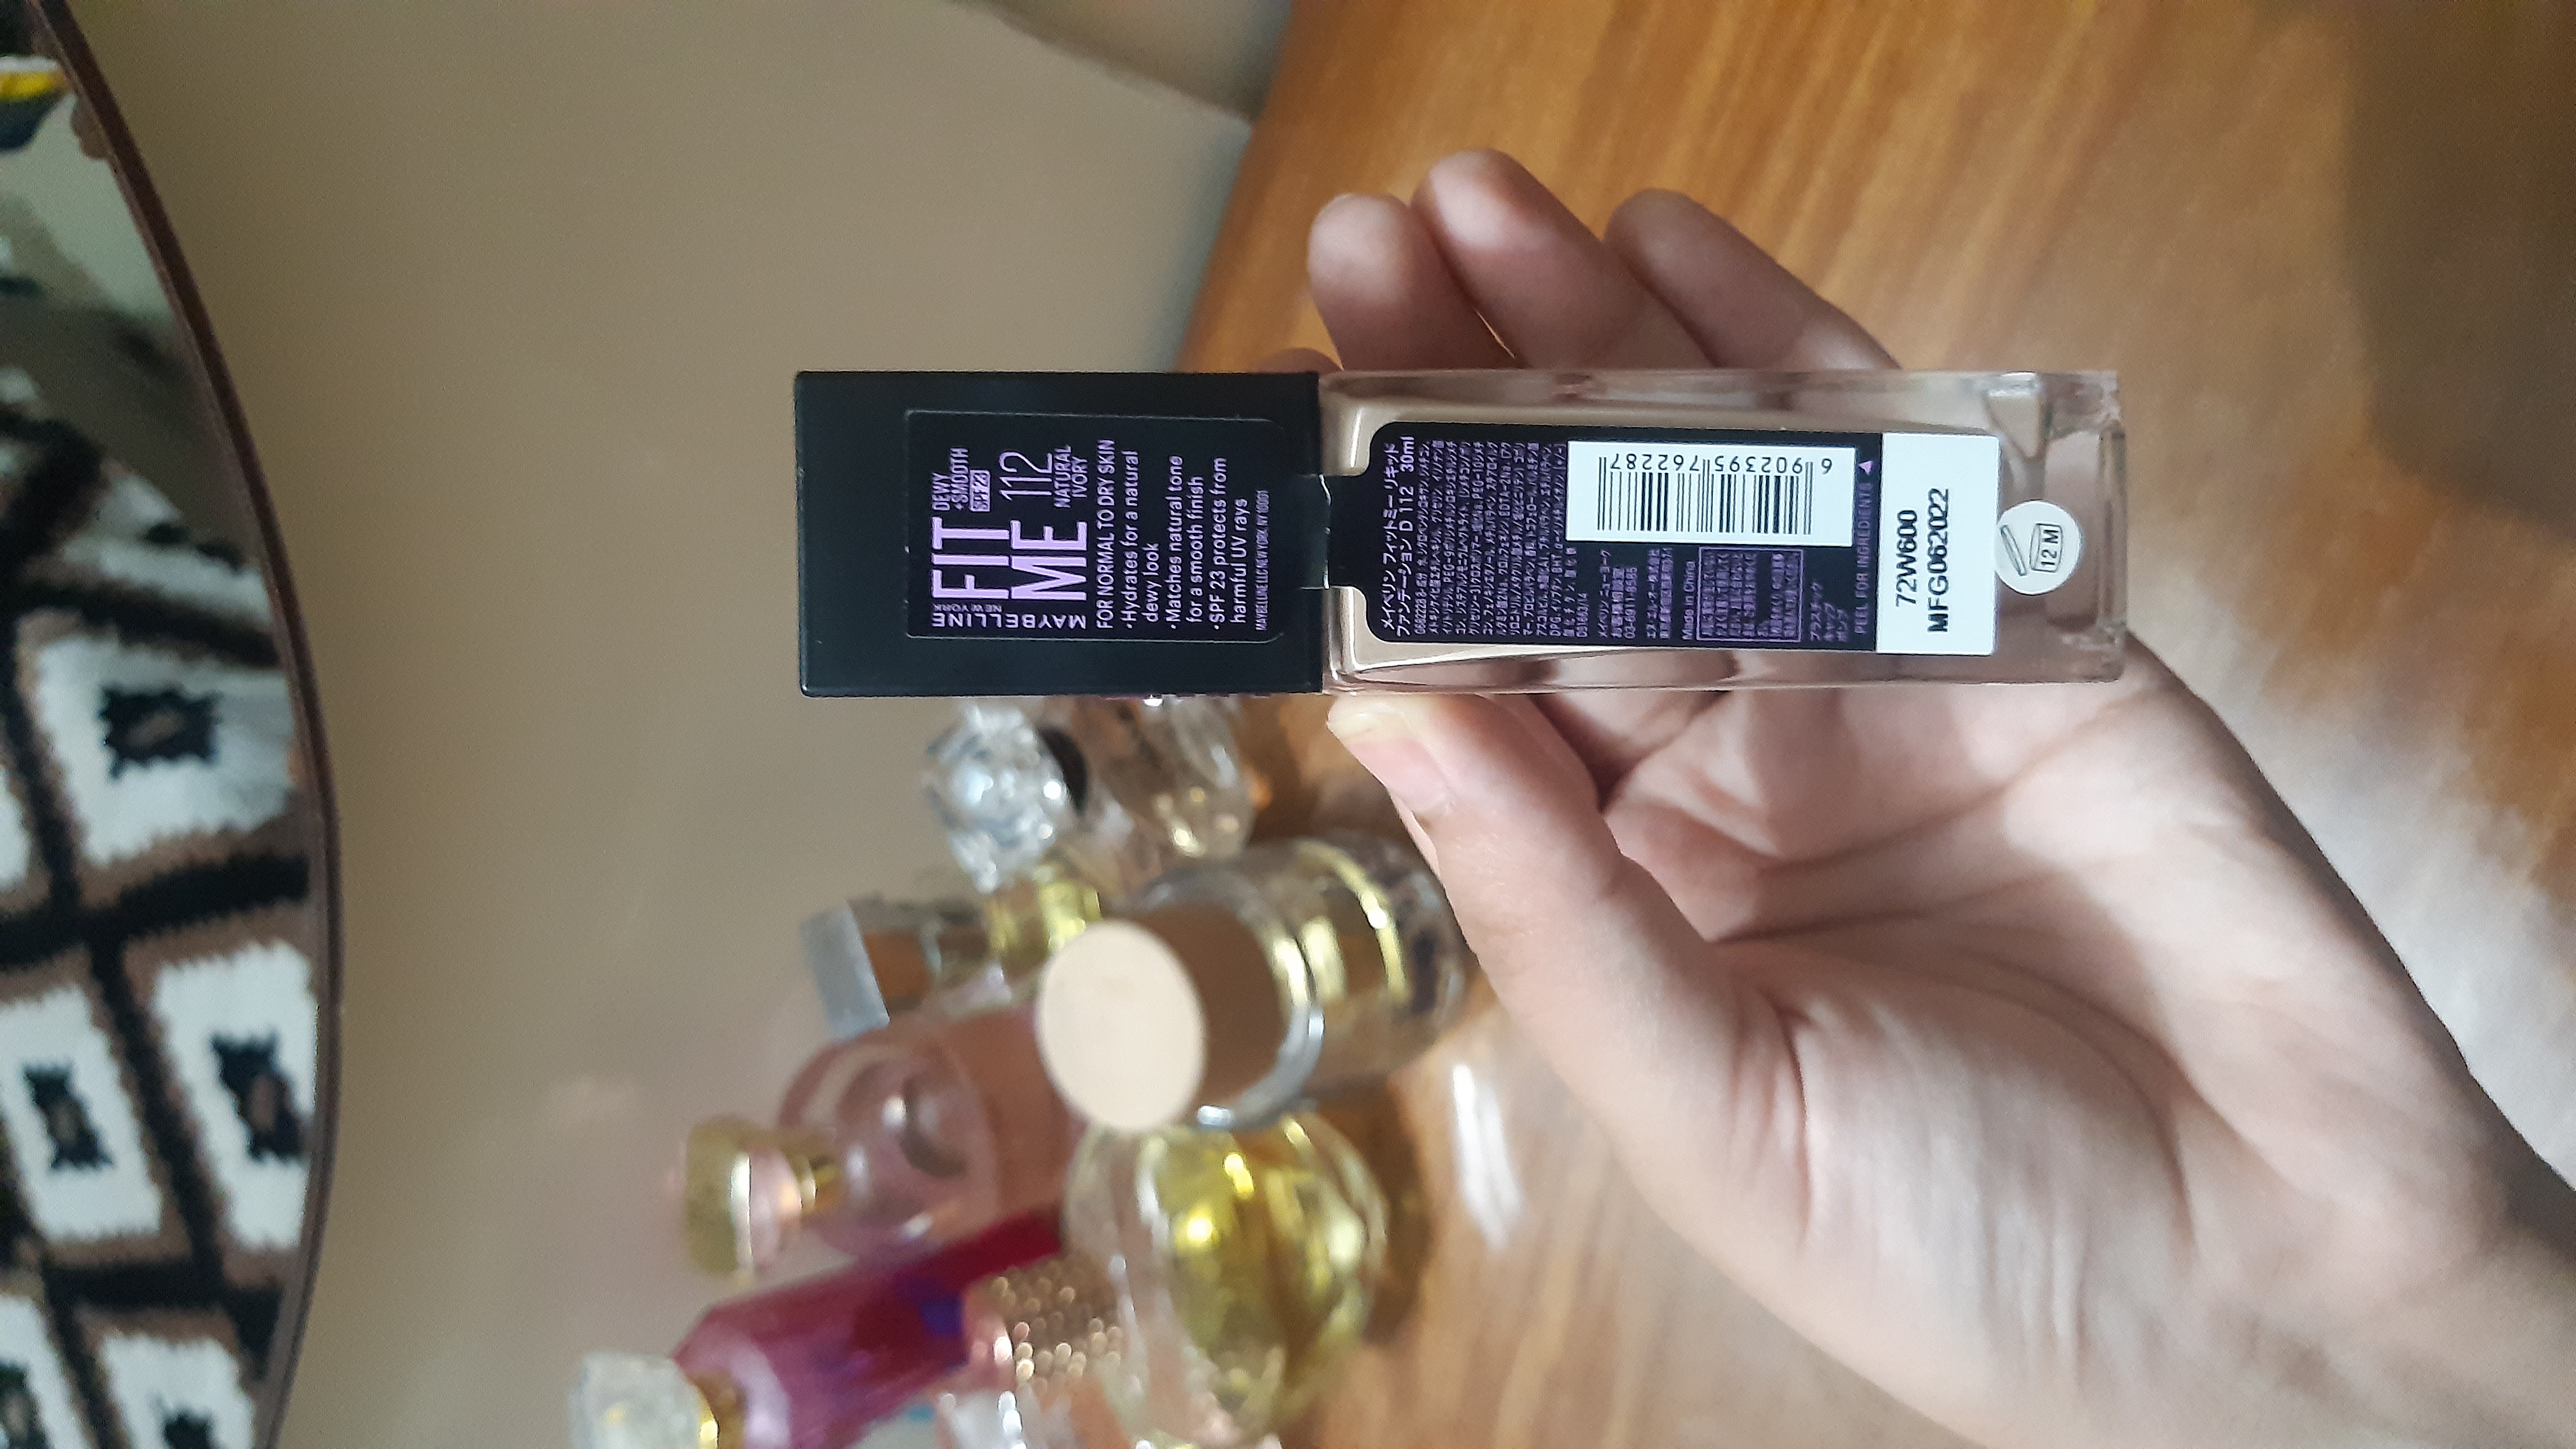 Maybelline Ny New Fit Me Dewy + Smooth Liquid Foundation Spf 23 - 112 –